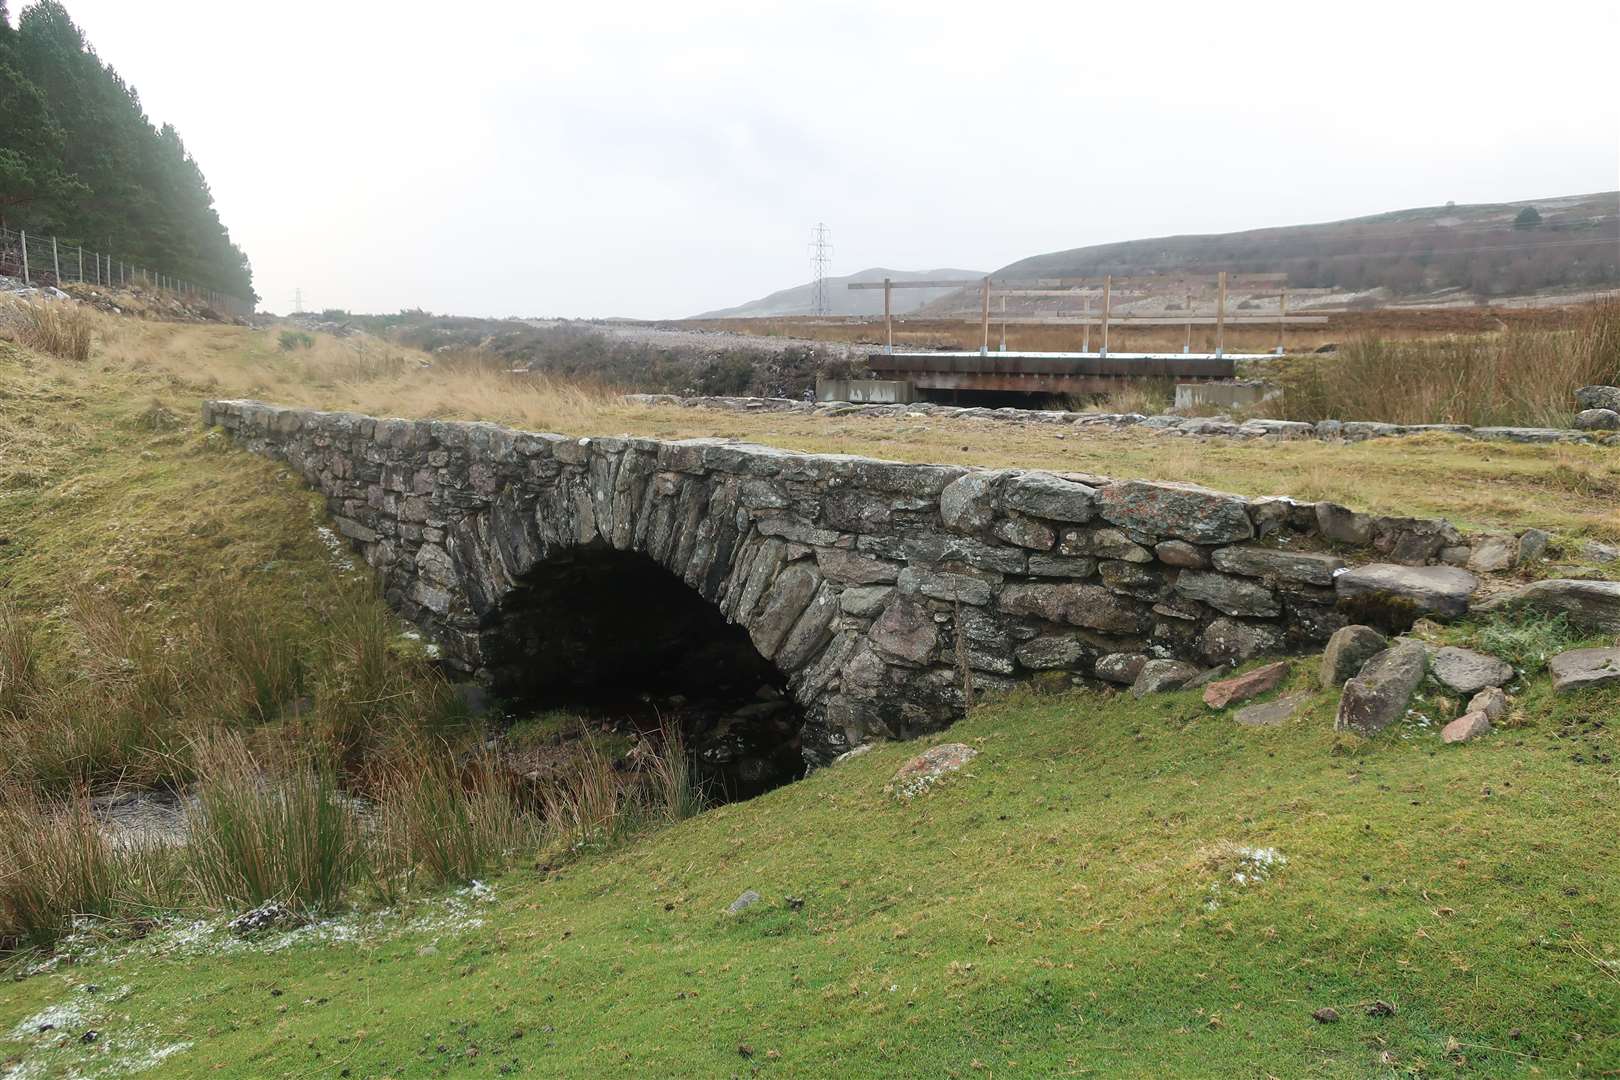 The Wade bridge - or its subsequent replacement - alongside a recent bridge used for forestry work.